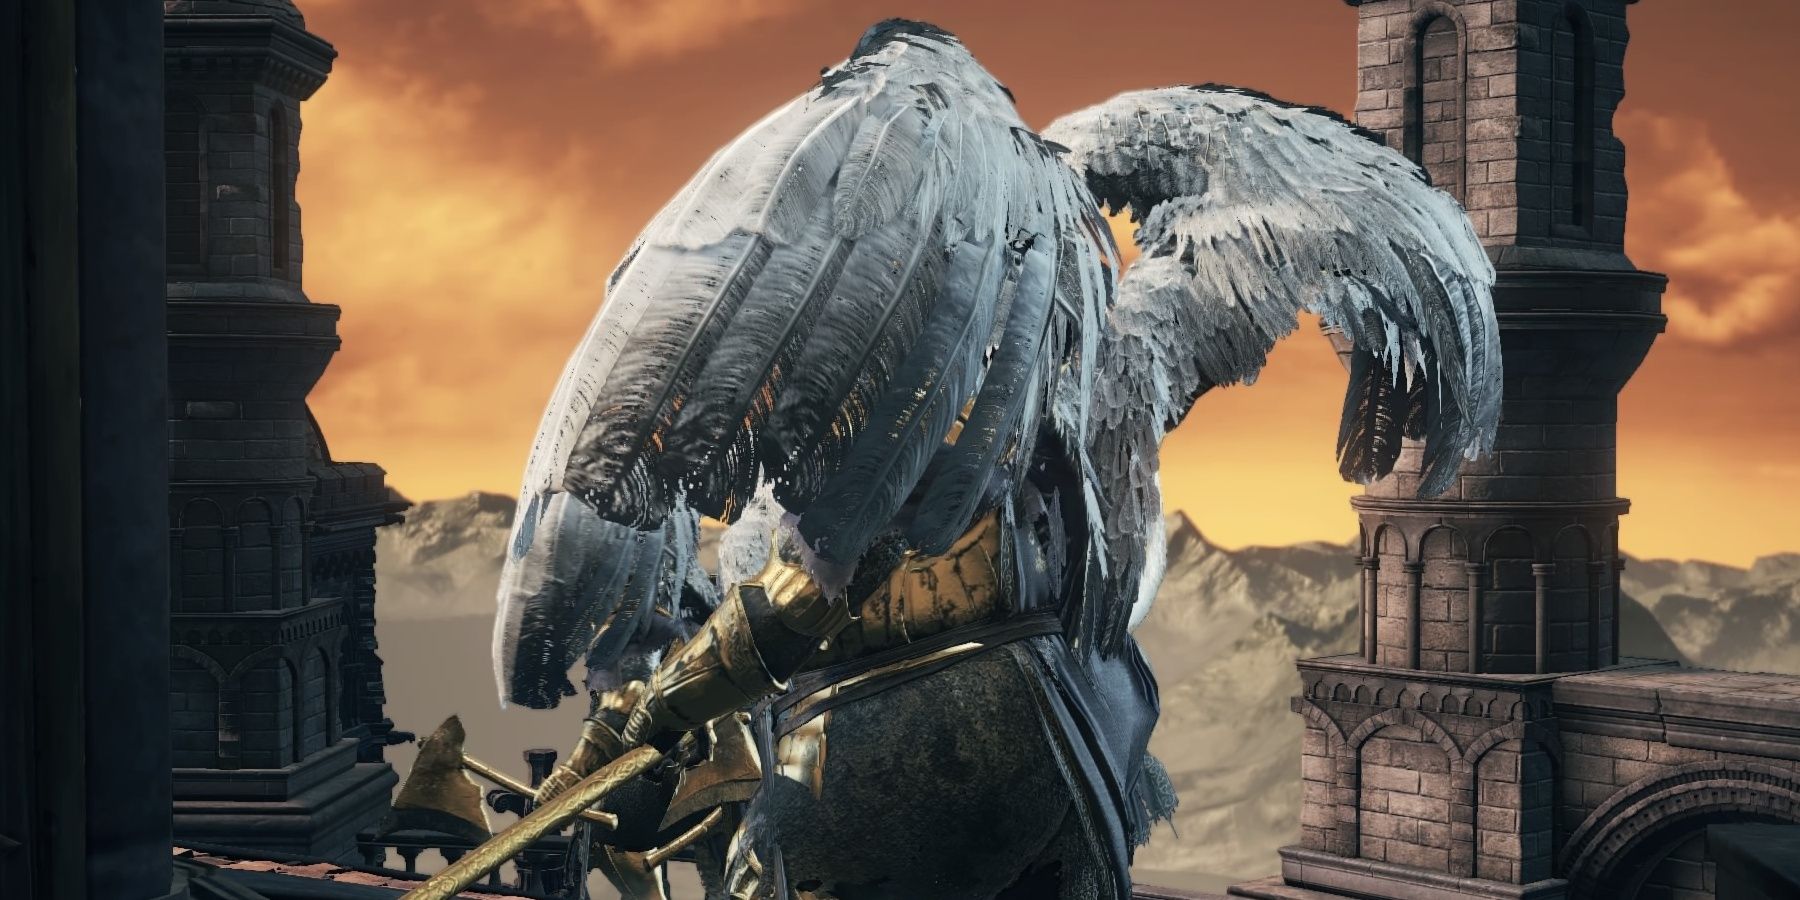 https://darksouls3.wiki.fextralife.com/Ascended+Winged+Knight